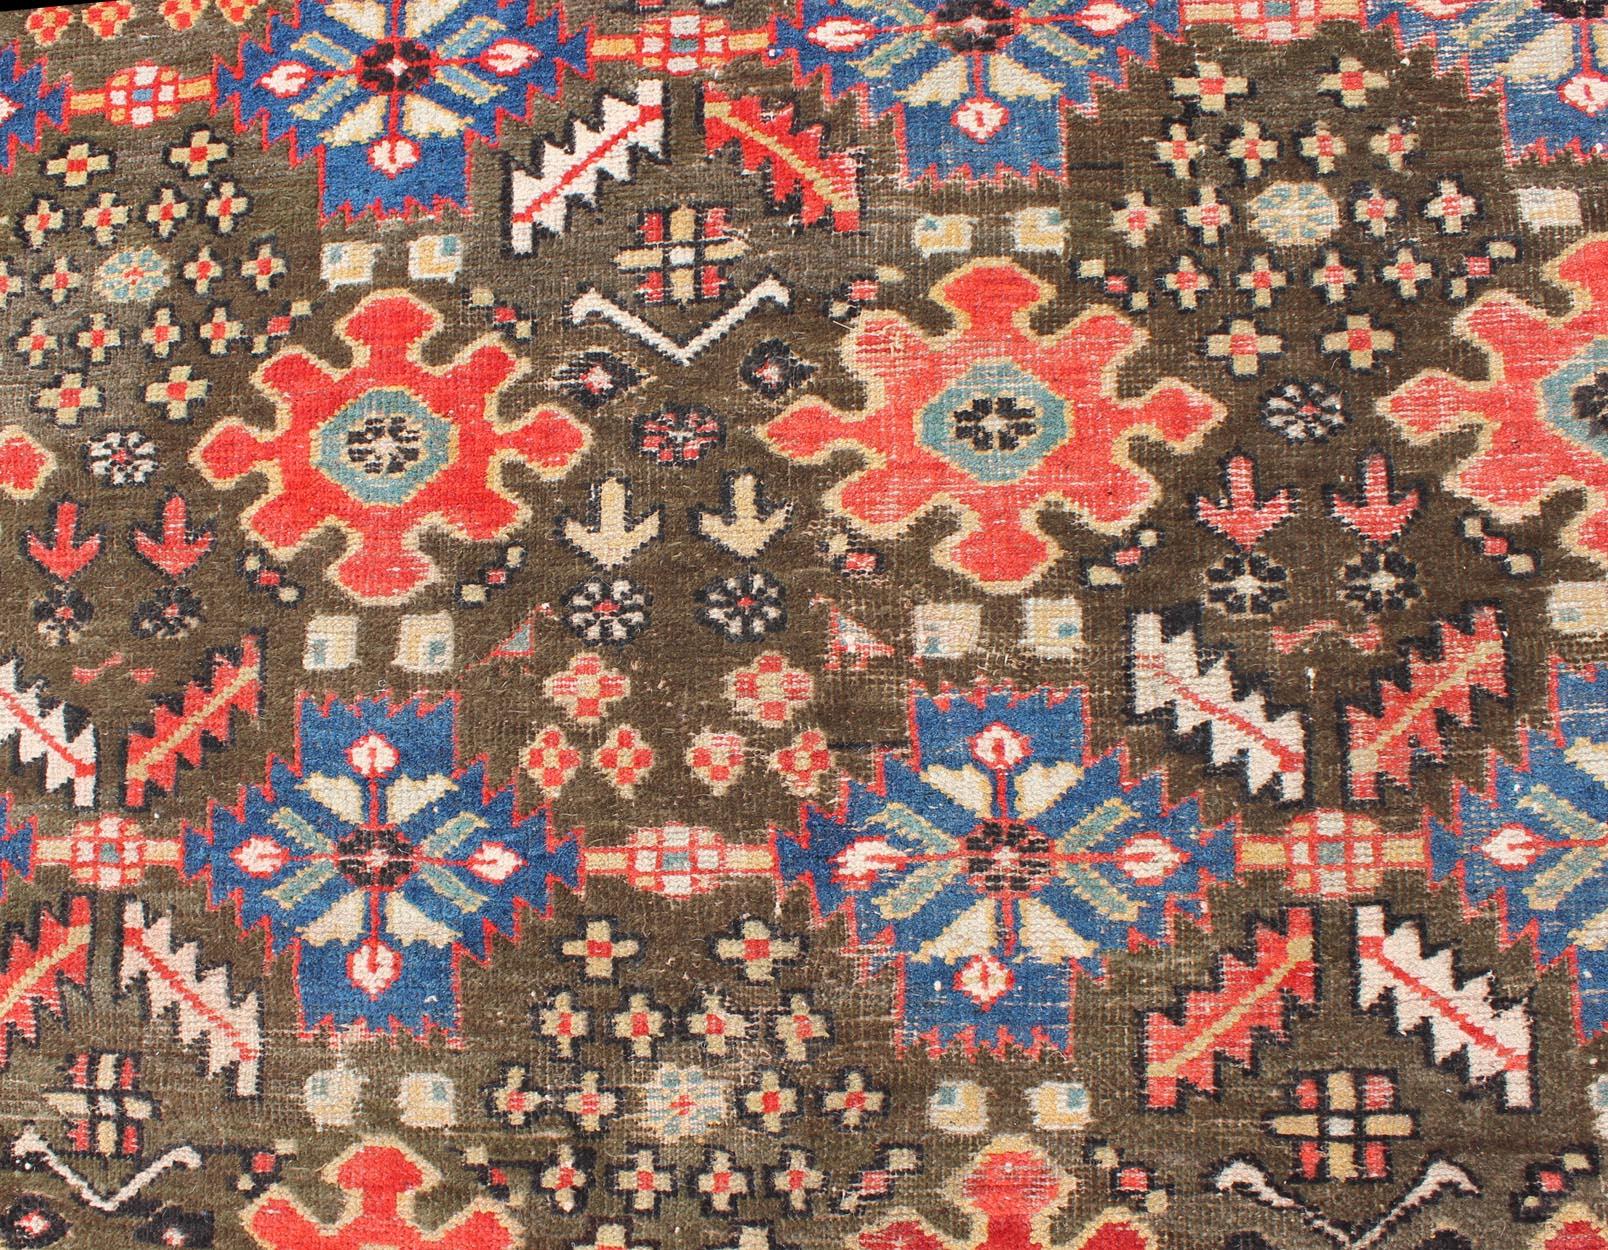 Tribal Large Antique Kurdish Rug with All-Over Design in Brown/Green, Red, and Blue For Sale